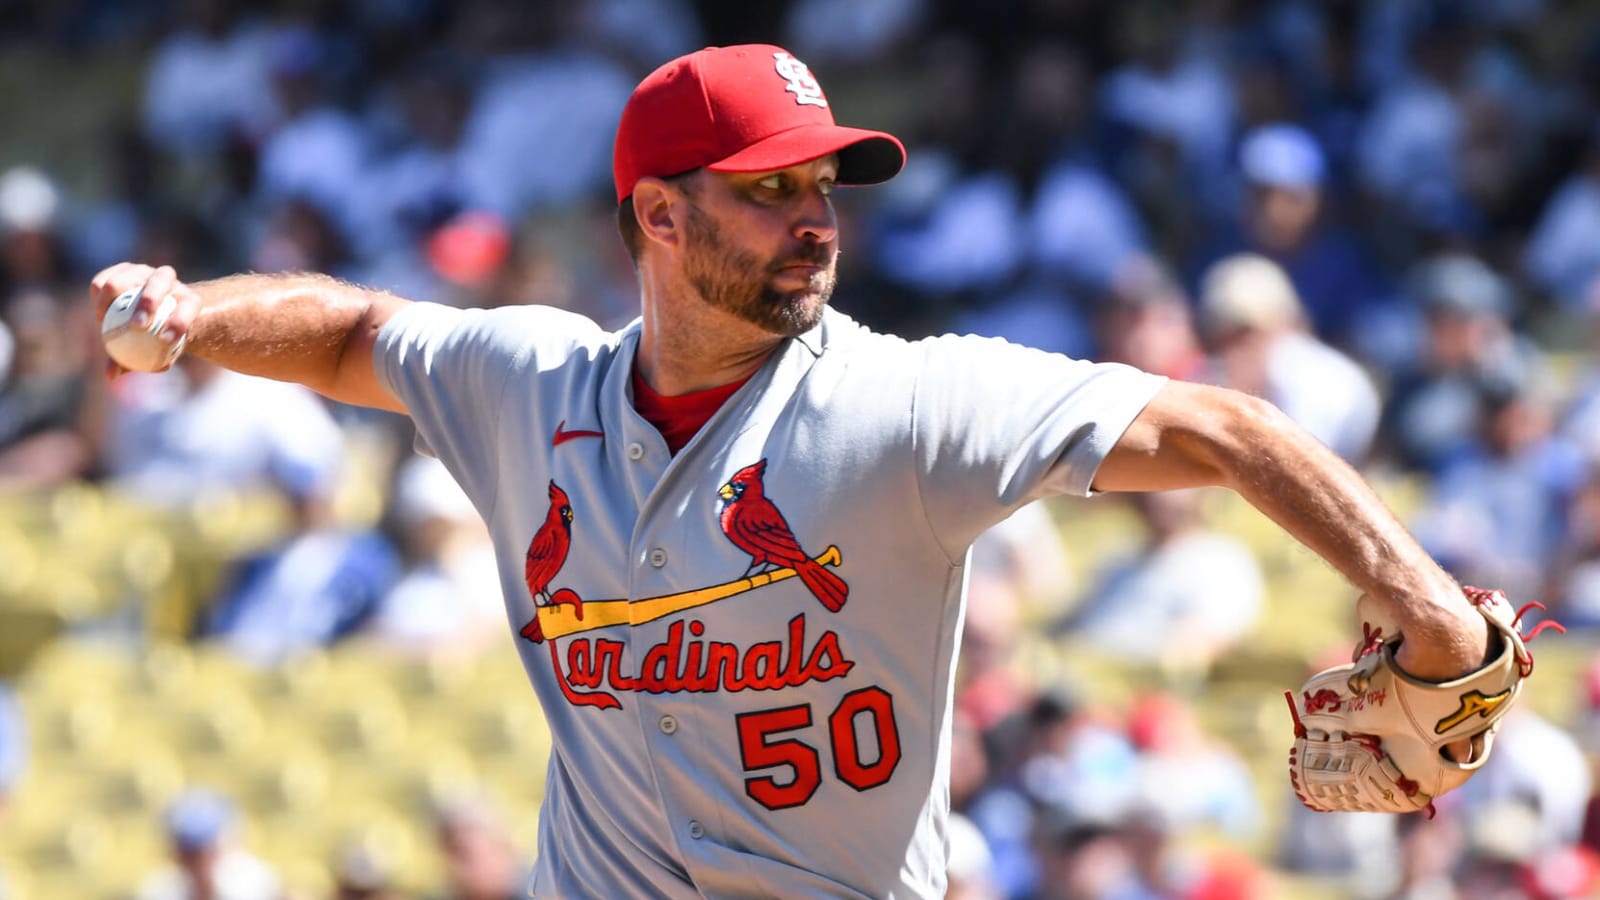 Cardinals ace to miss significant time after injury in World Baseball Classic